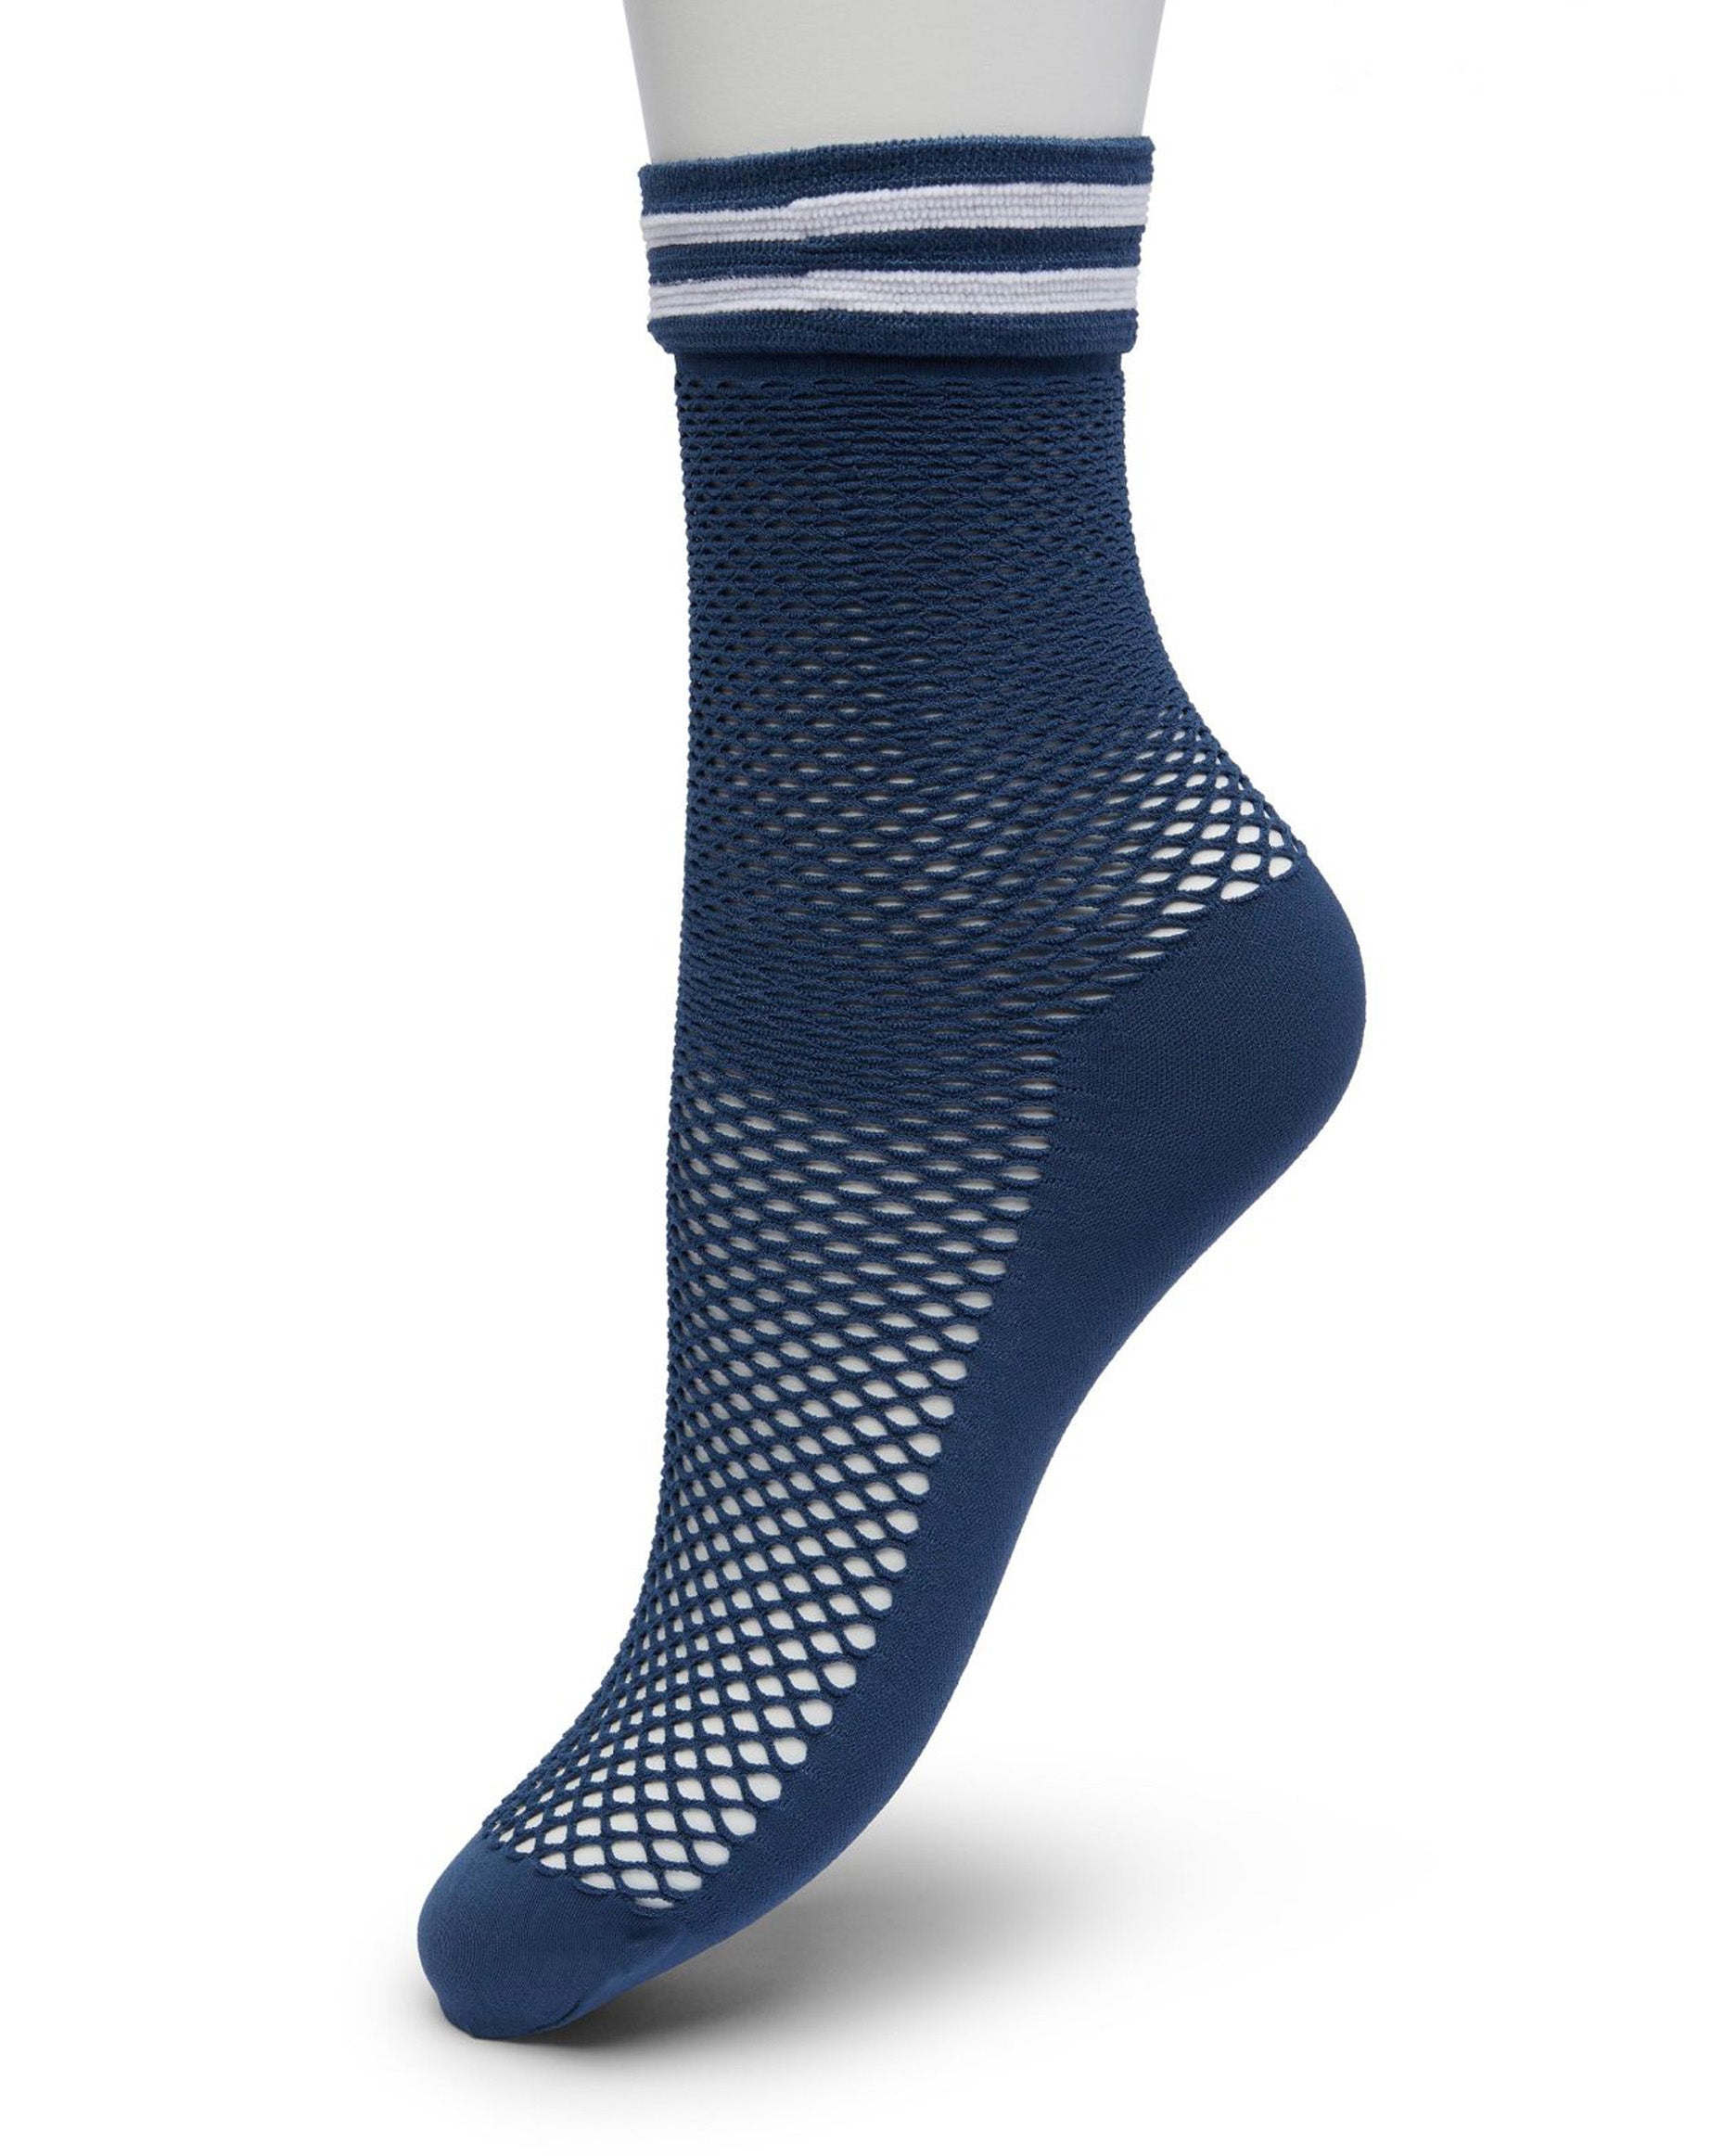 Bonnie Doon Sporty Fishnet Socks - Navy blue fishnet ankle socks with a plain opaque sole and reinforced toe and deep elasticated comfort cuff with a white double sports stripe.